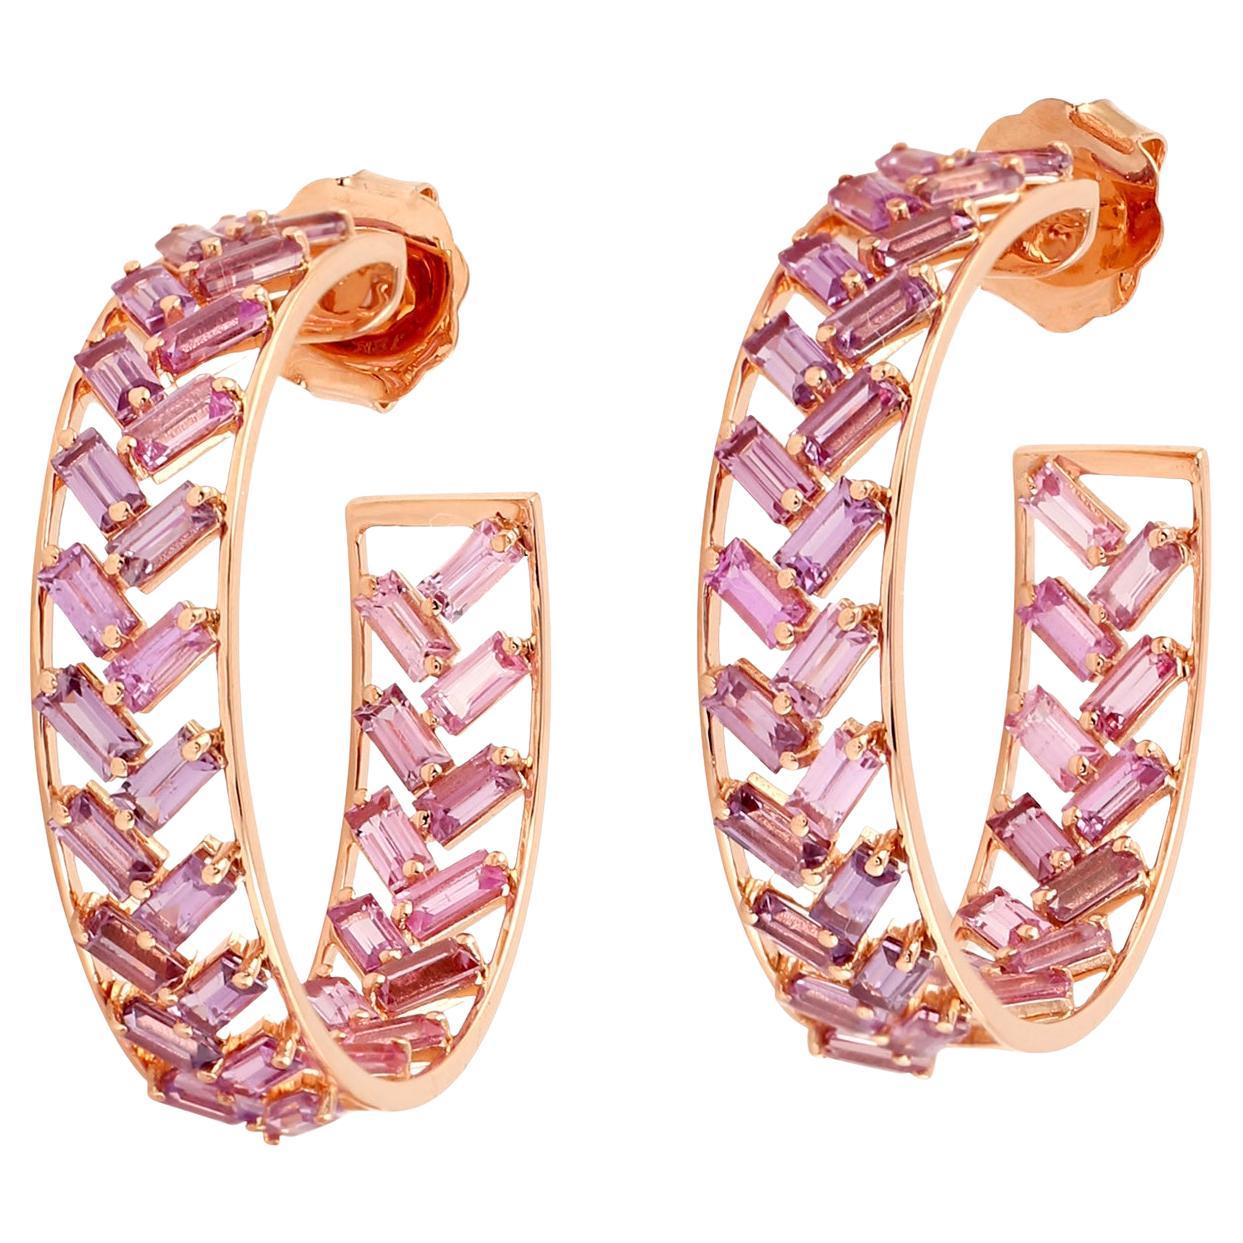 11.81 ct Baguette Shaped Pink Sapphire Hoop Earrings Made In 18K Rose Gold For Sale